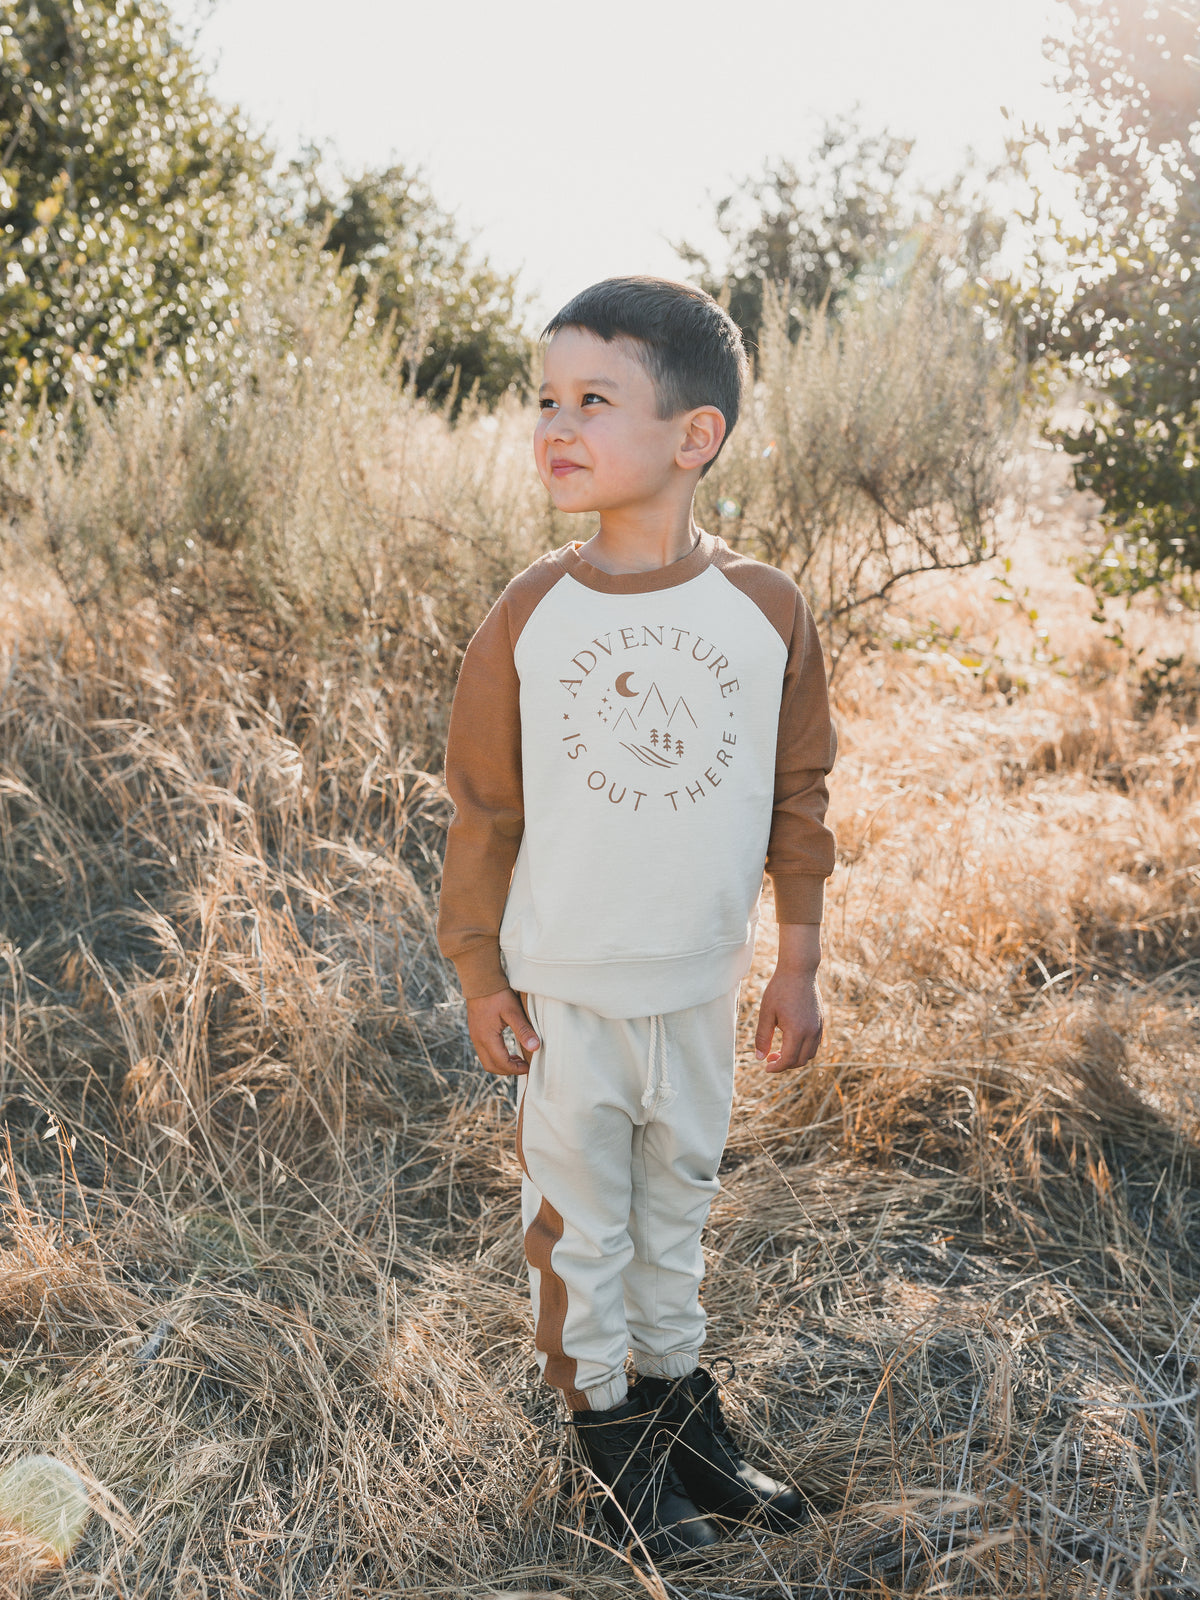 https://www.shopmilkbots.shop/wp-content/uploads/1692/67/our-clearance-offers-a-great-option-to-save-money-while-also-get-rylee-cru-jogger-pant-stone-rylee-cru_1.jpg